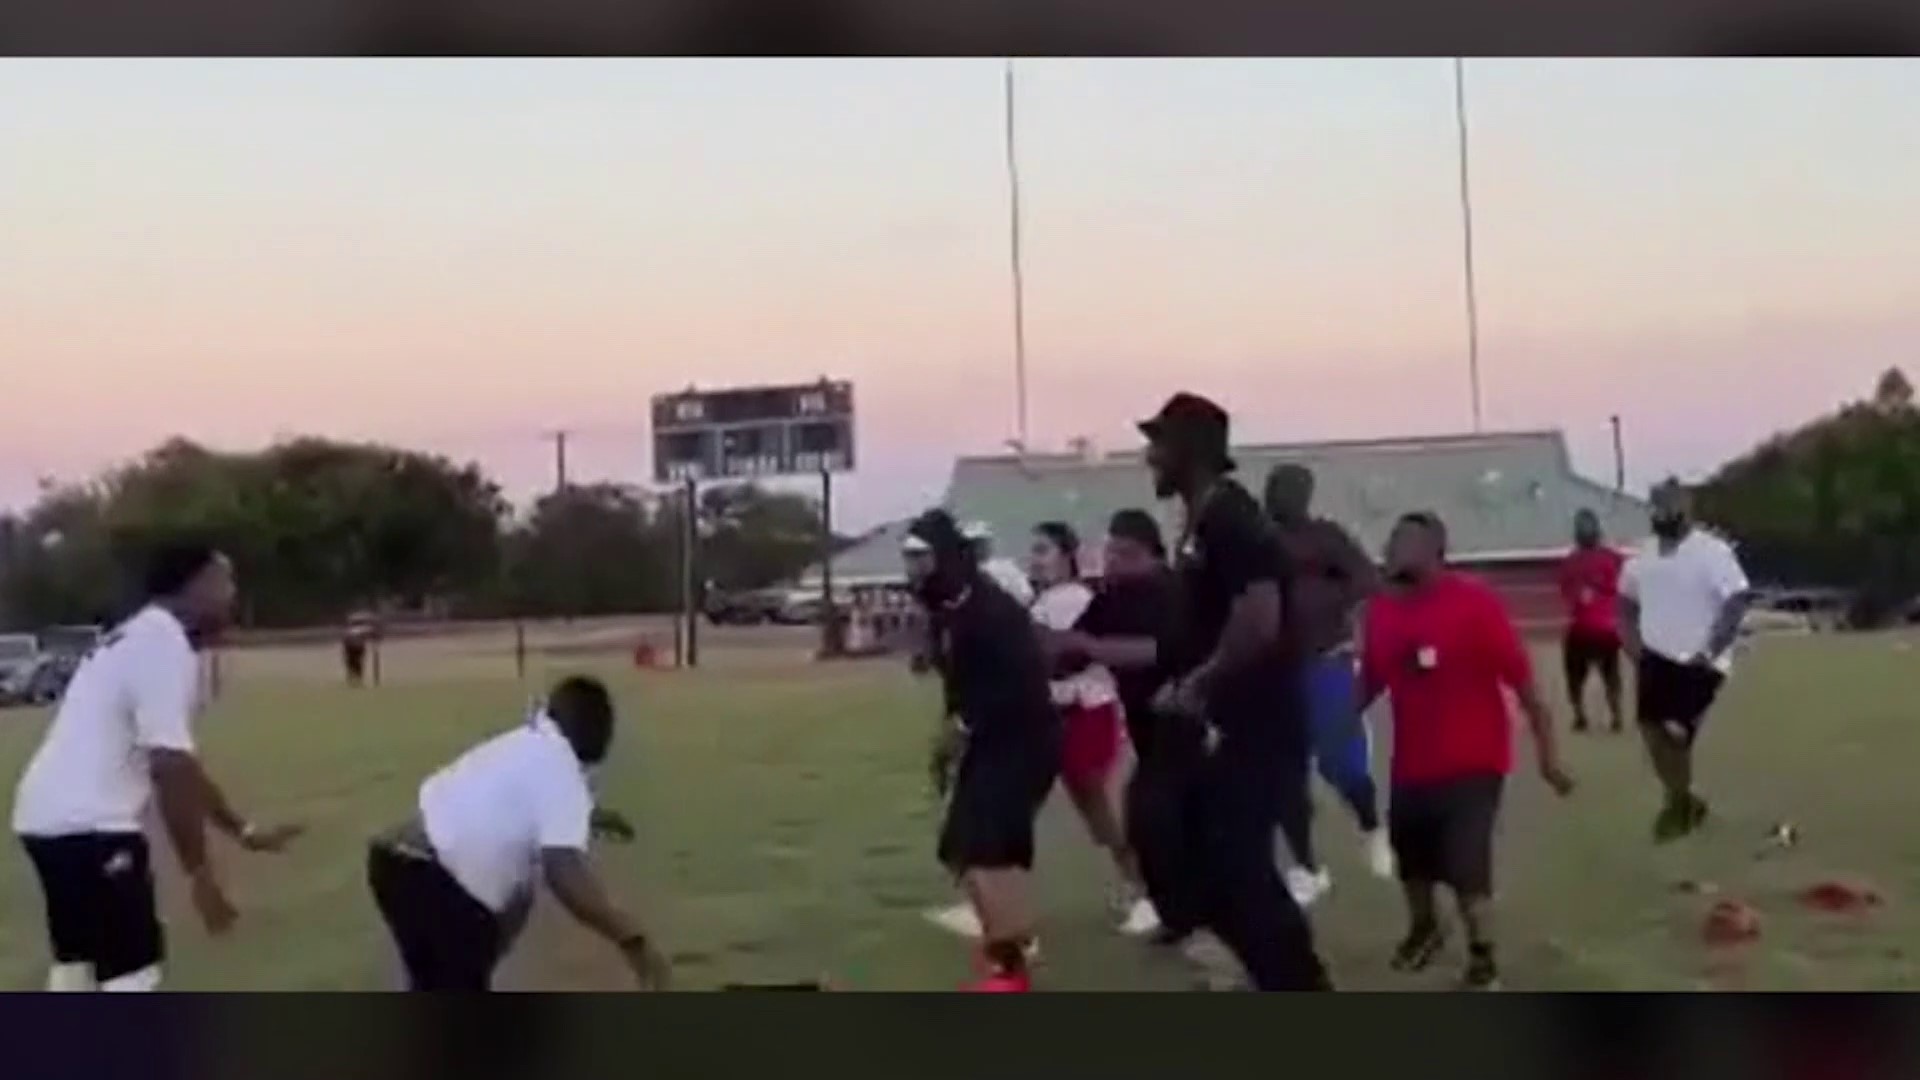 WFAA has obtained new video showing the moments before coach Mike Hickmon was killed.